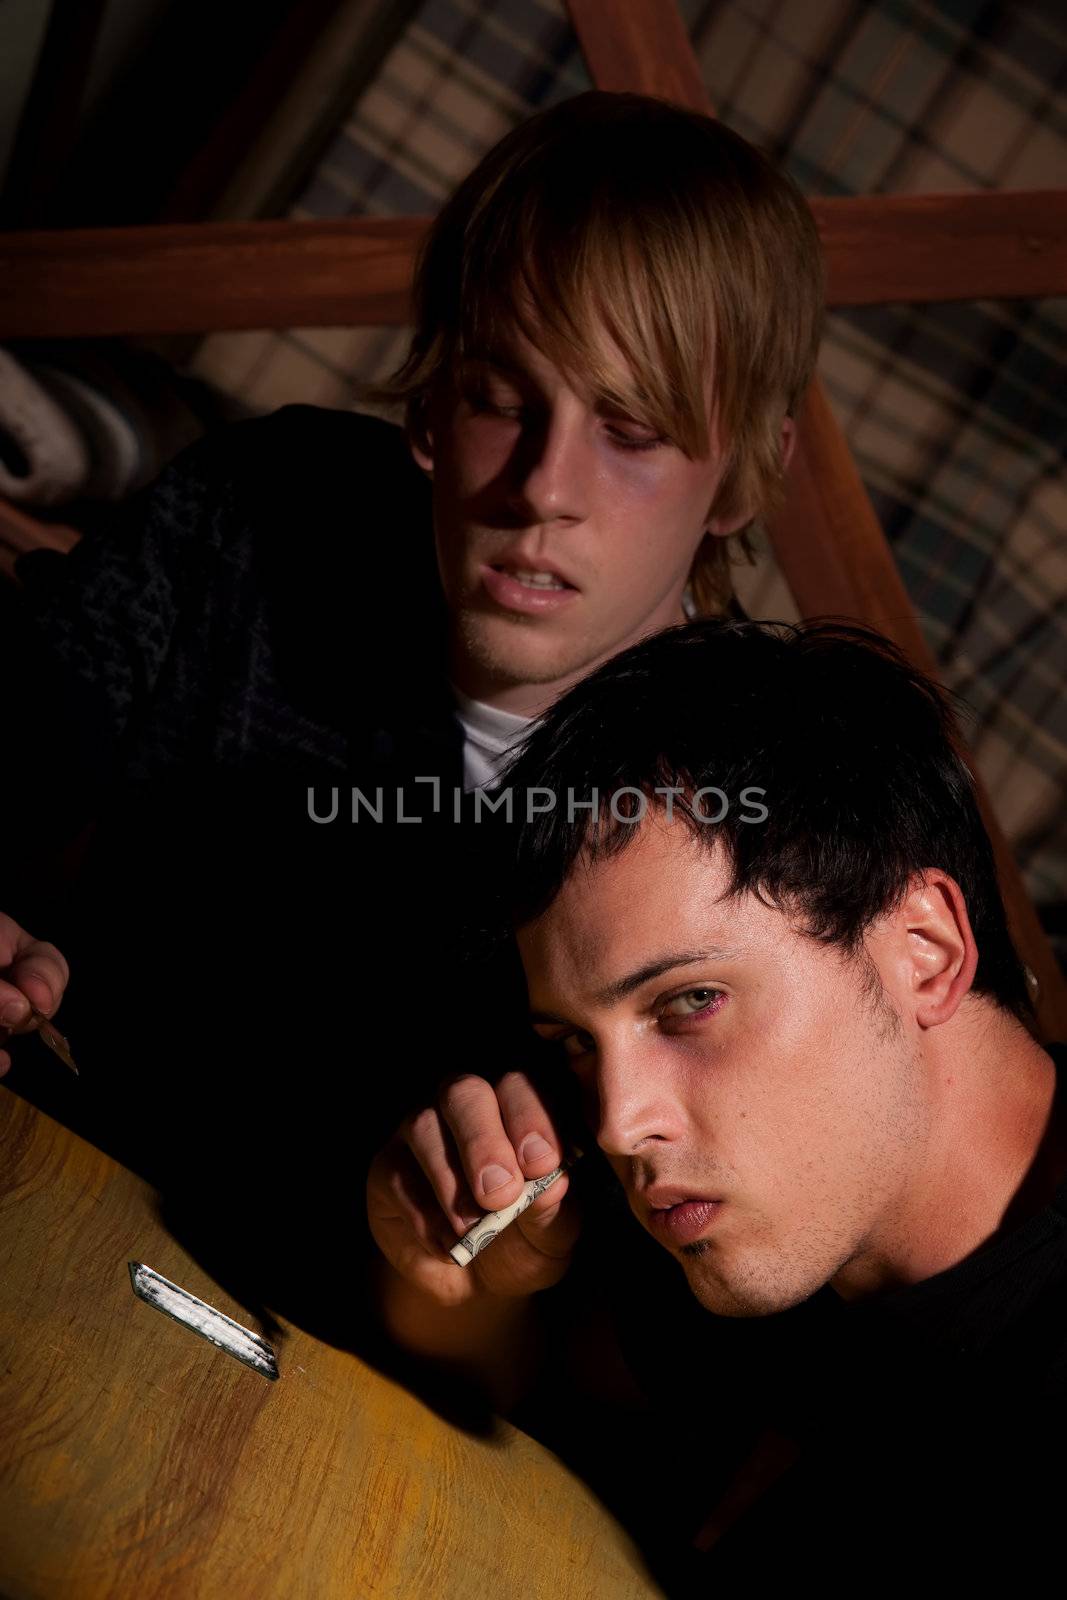 Two young men with heroin or cocaine on table